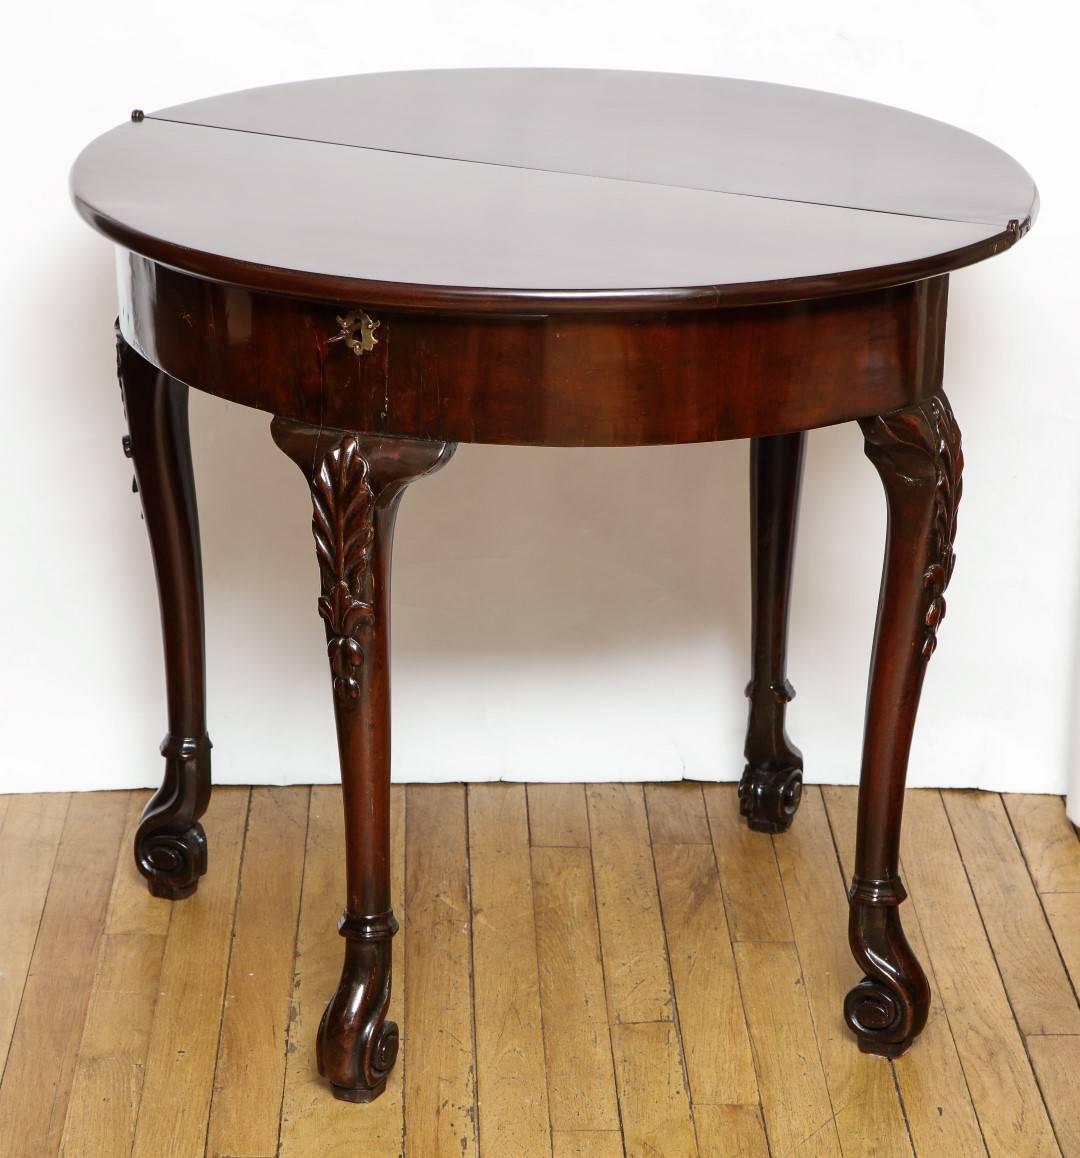 A George II Irish mahogany games table, shell carved knees terminating in scrolled feet.

Dimensions;
Closed-29